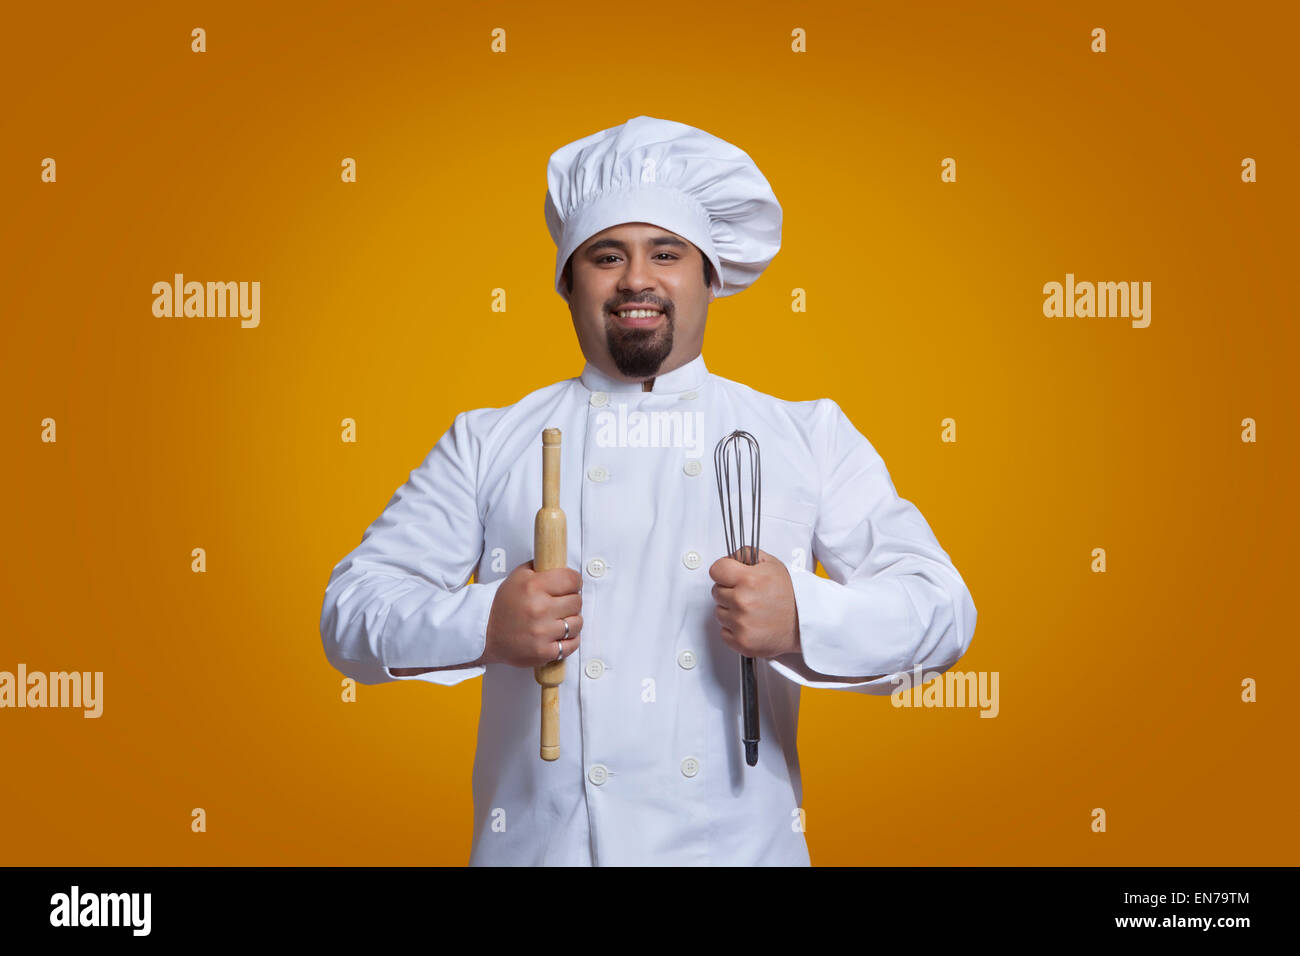 Portrait of chef holding wire whisk and rolling pin Stock Photo